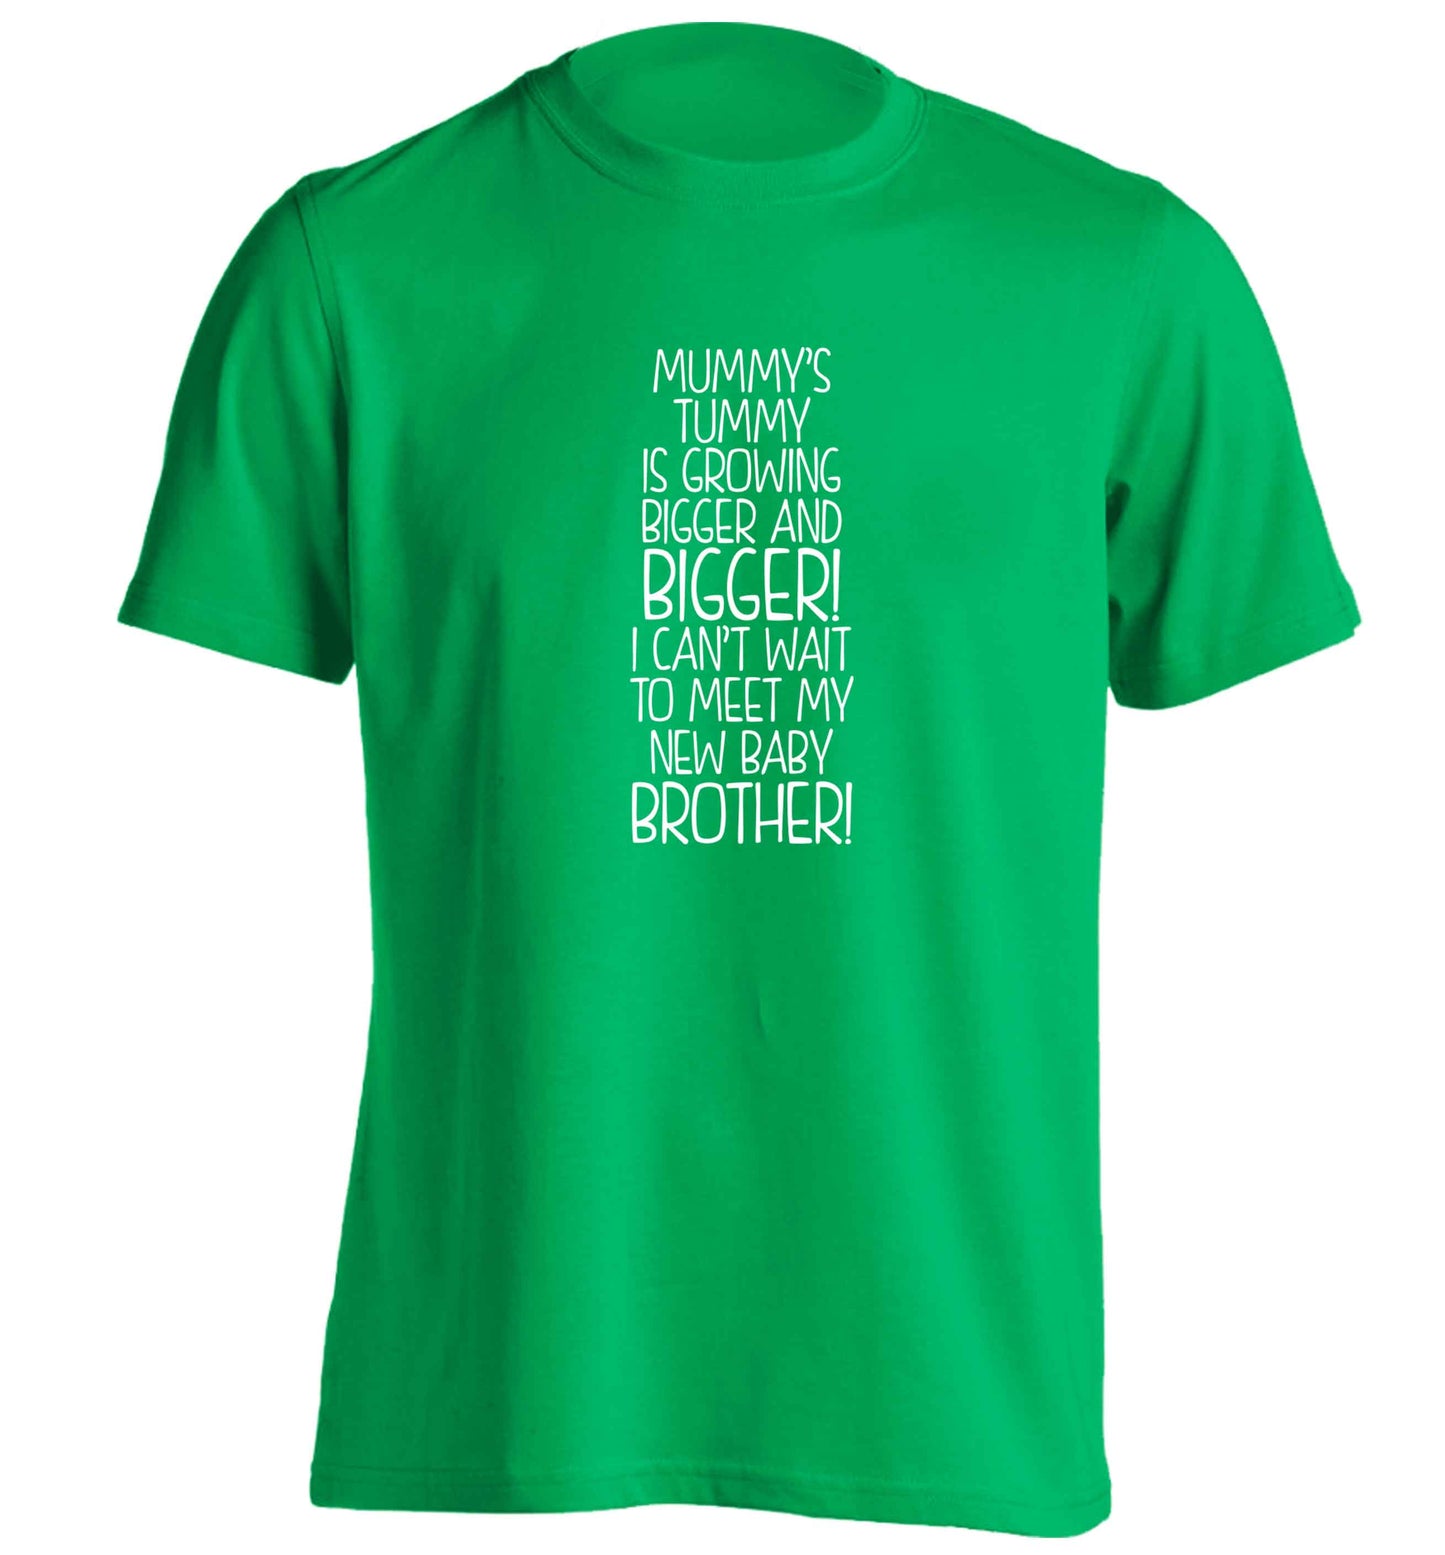 Mummy's tummy is growing bigger and bigger I can't wait to meet my new baby brother! adults unisex green Tshirt 2XL